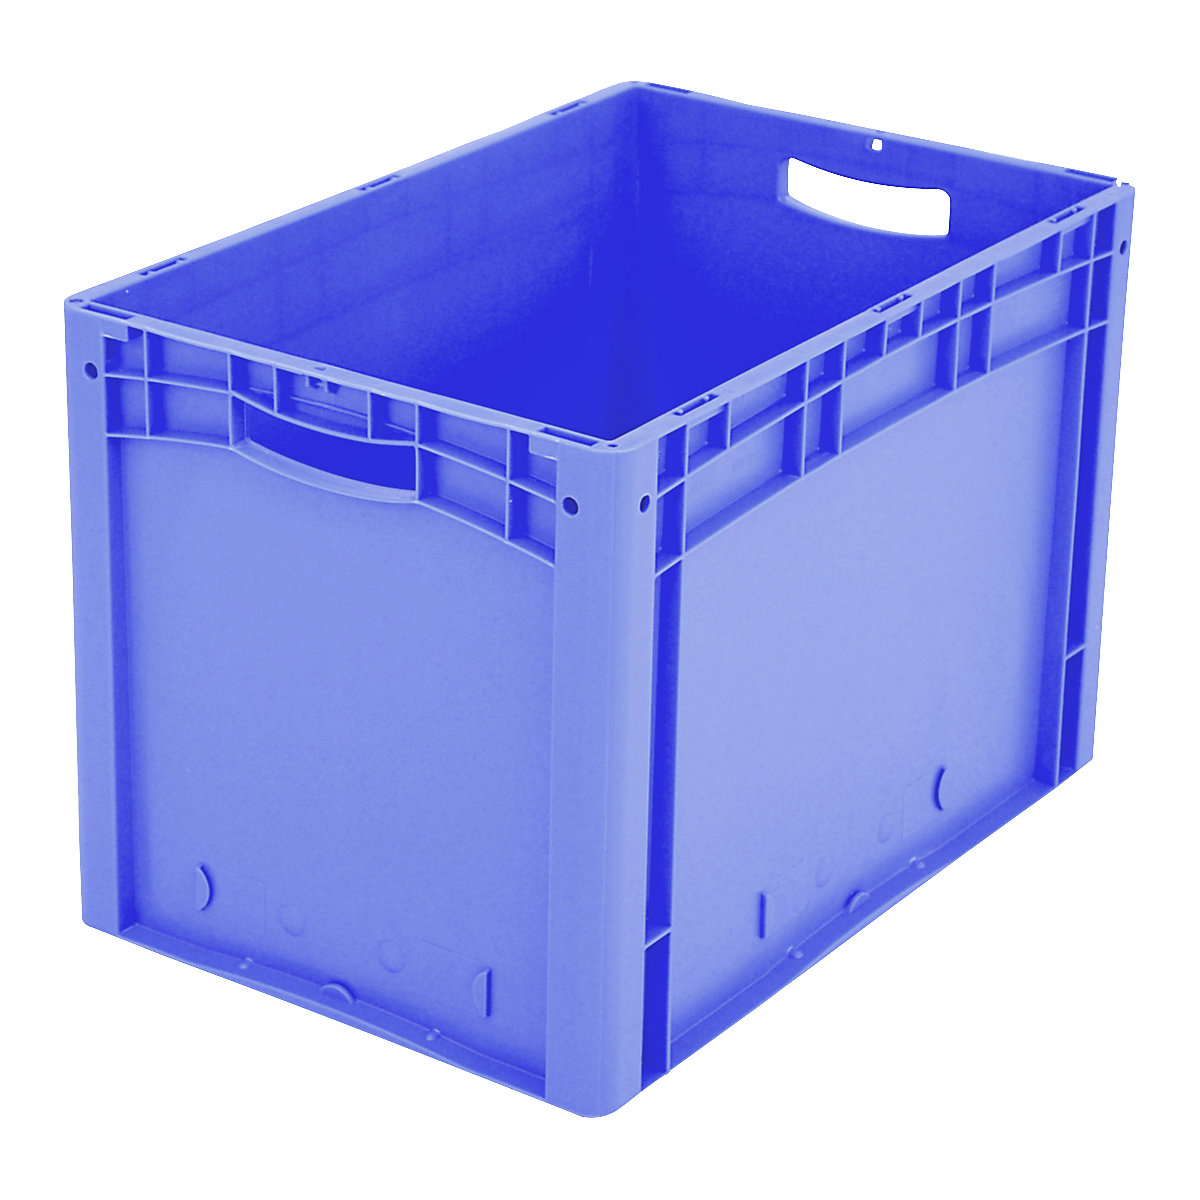 XL Euro stacking container – BITO, standard model, LxWxH 600 x 400 x 420 mm-14